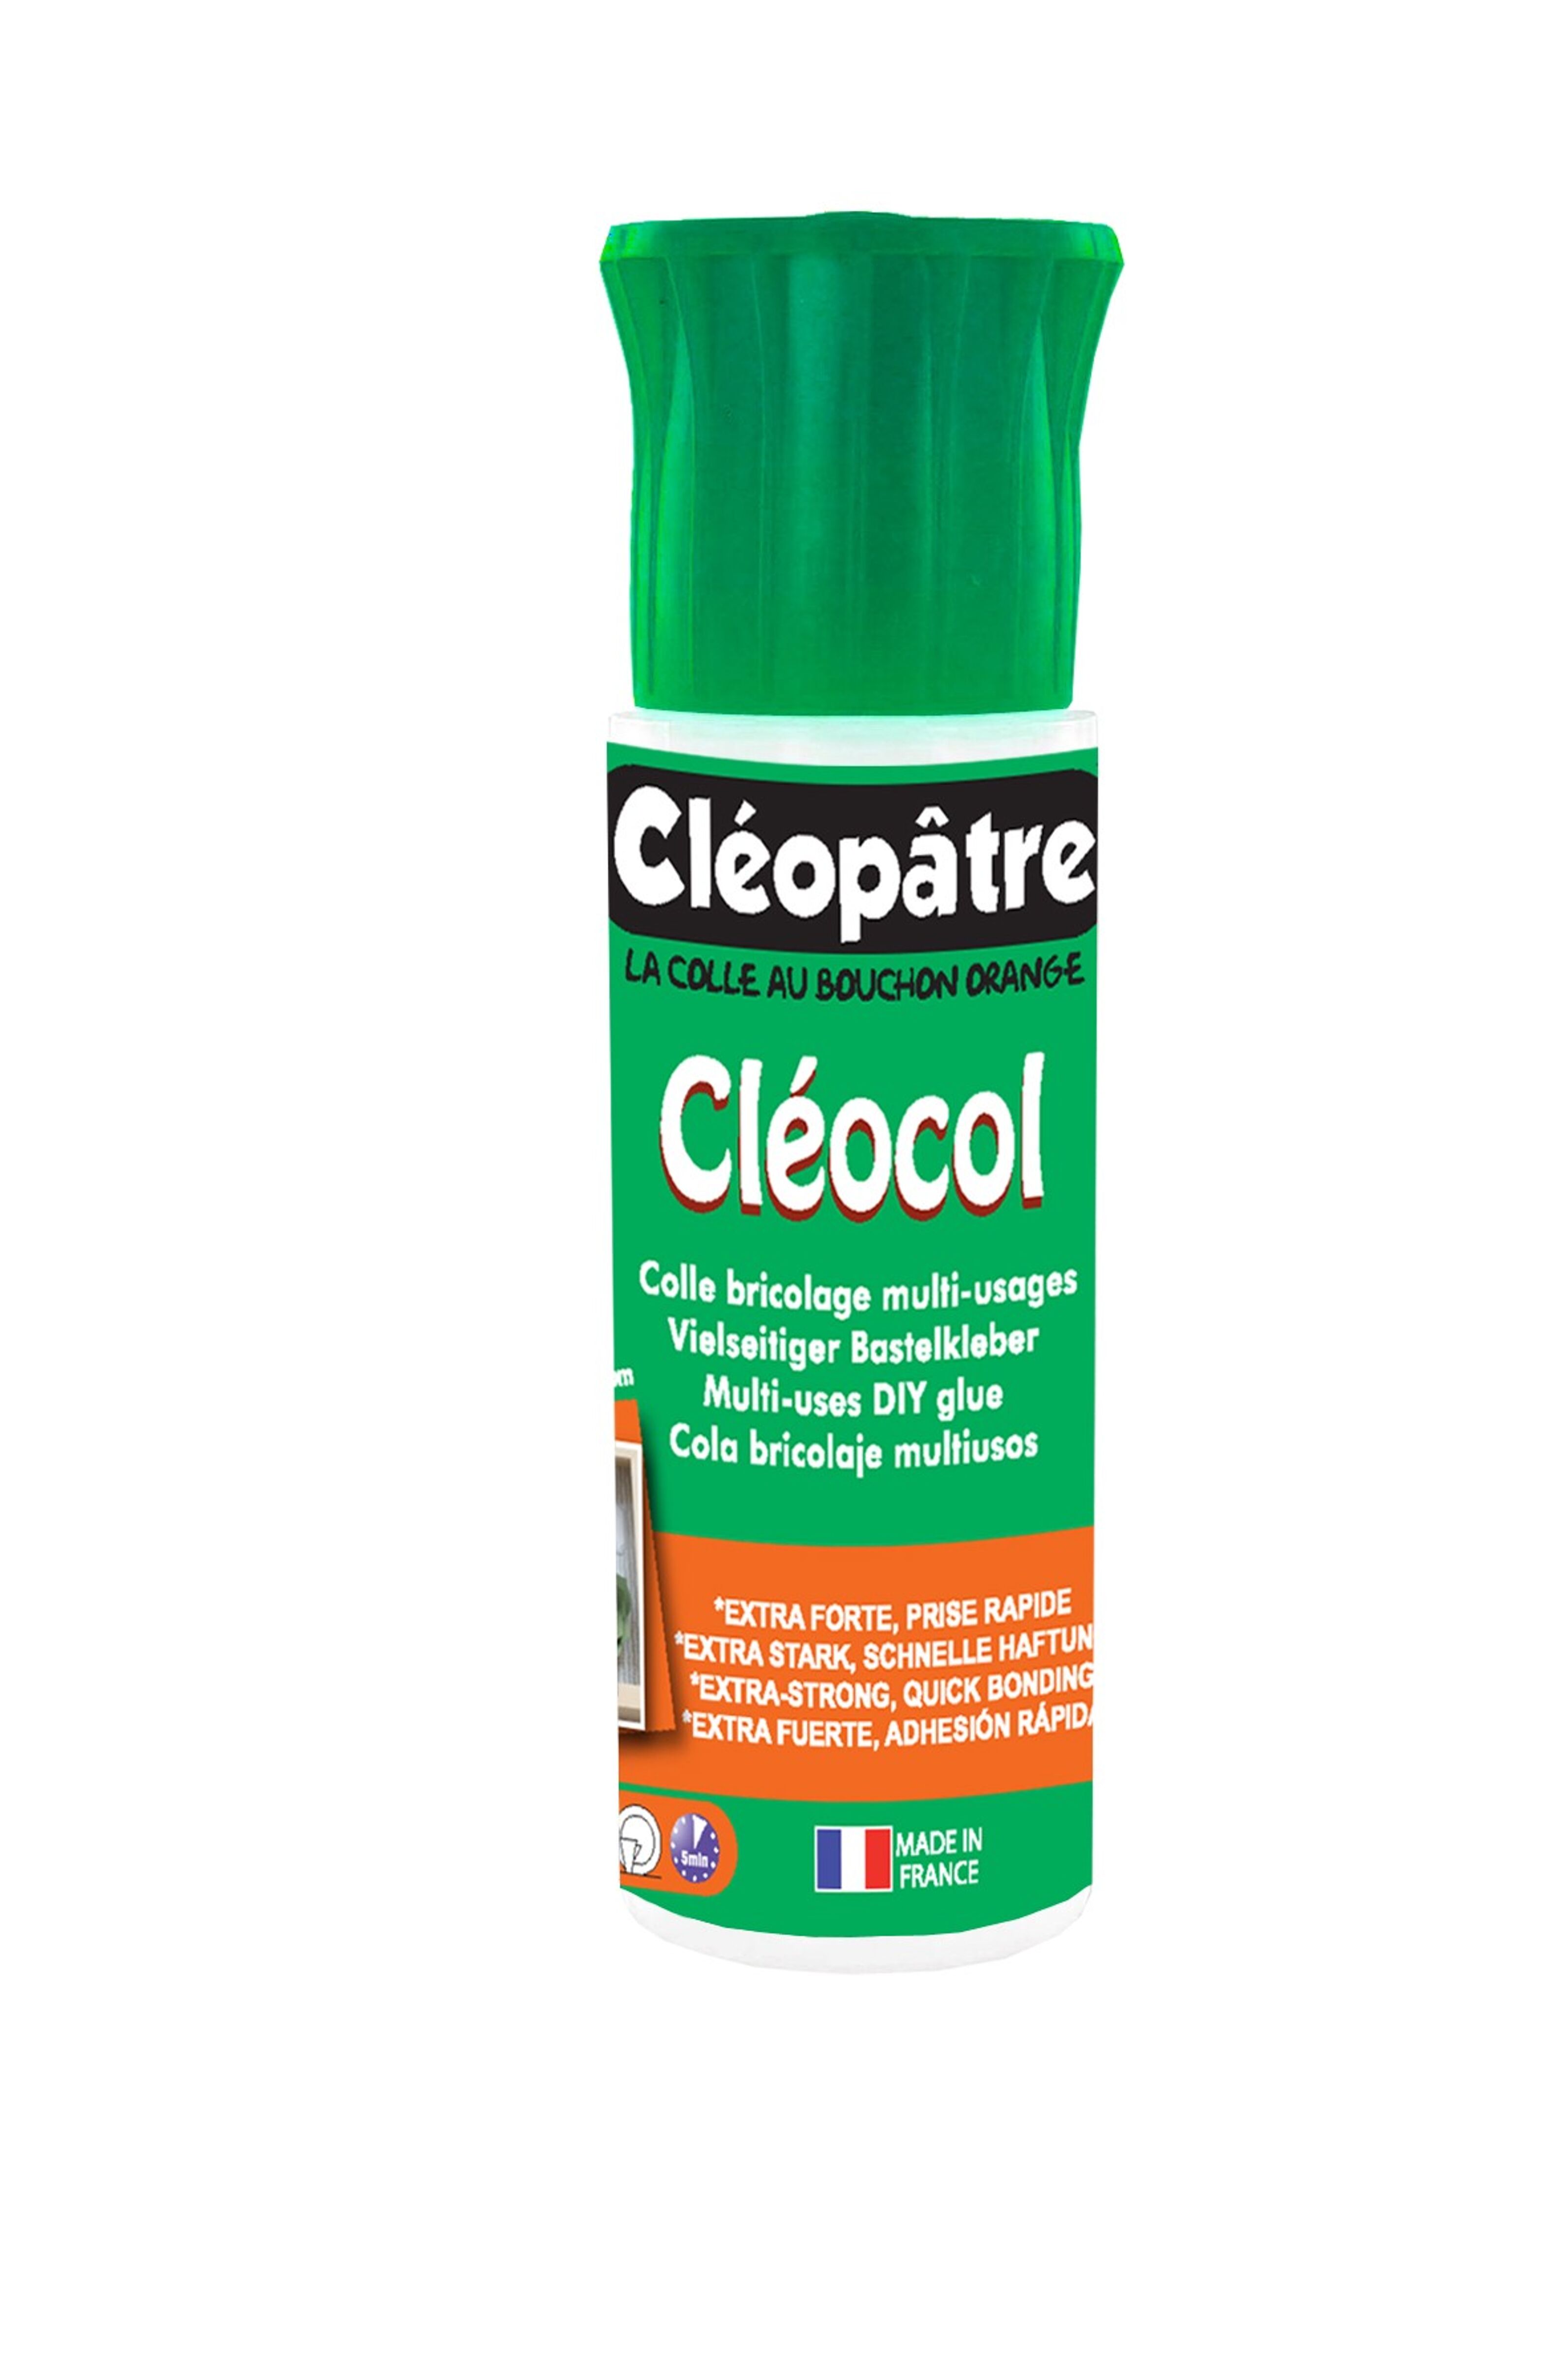 Cléocol colle extra-forte multi-usages (250 g) - Decapod